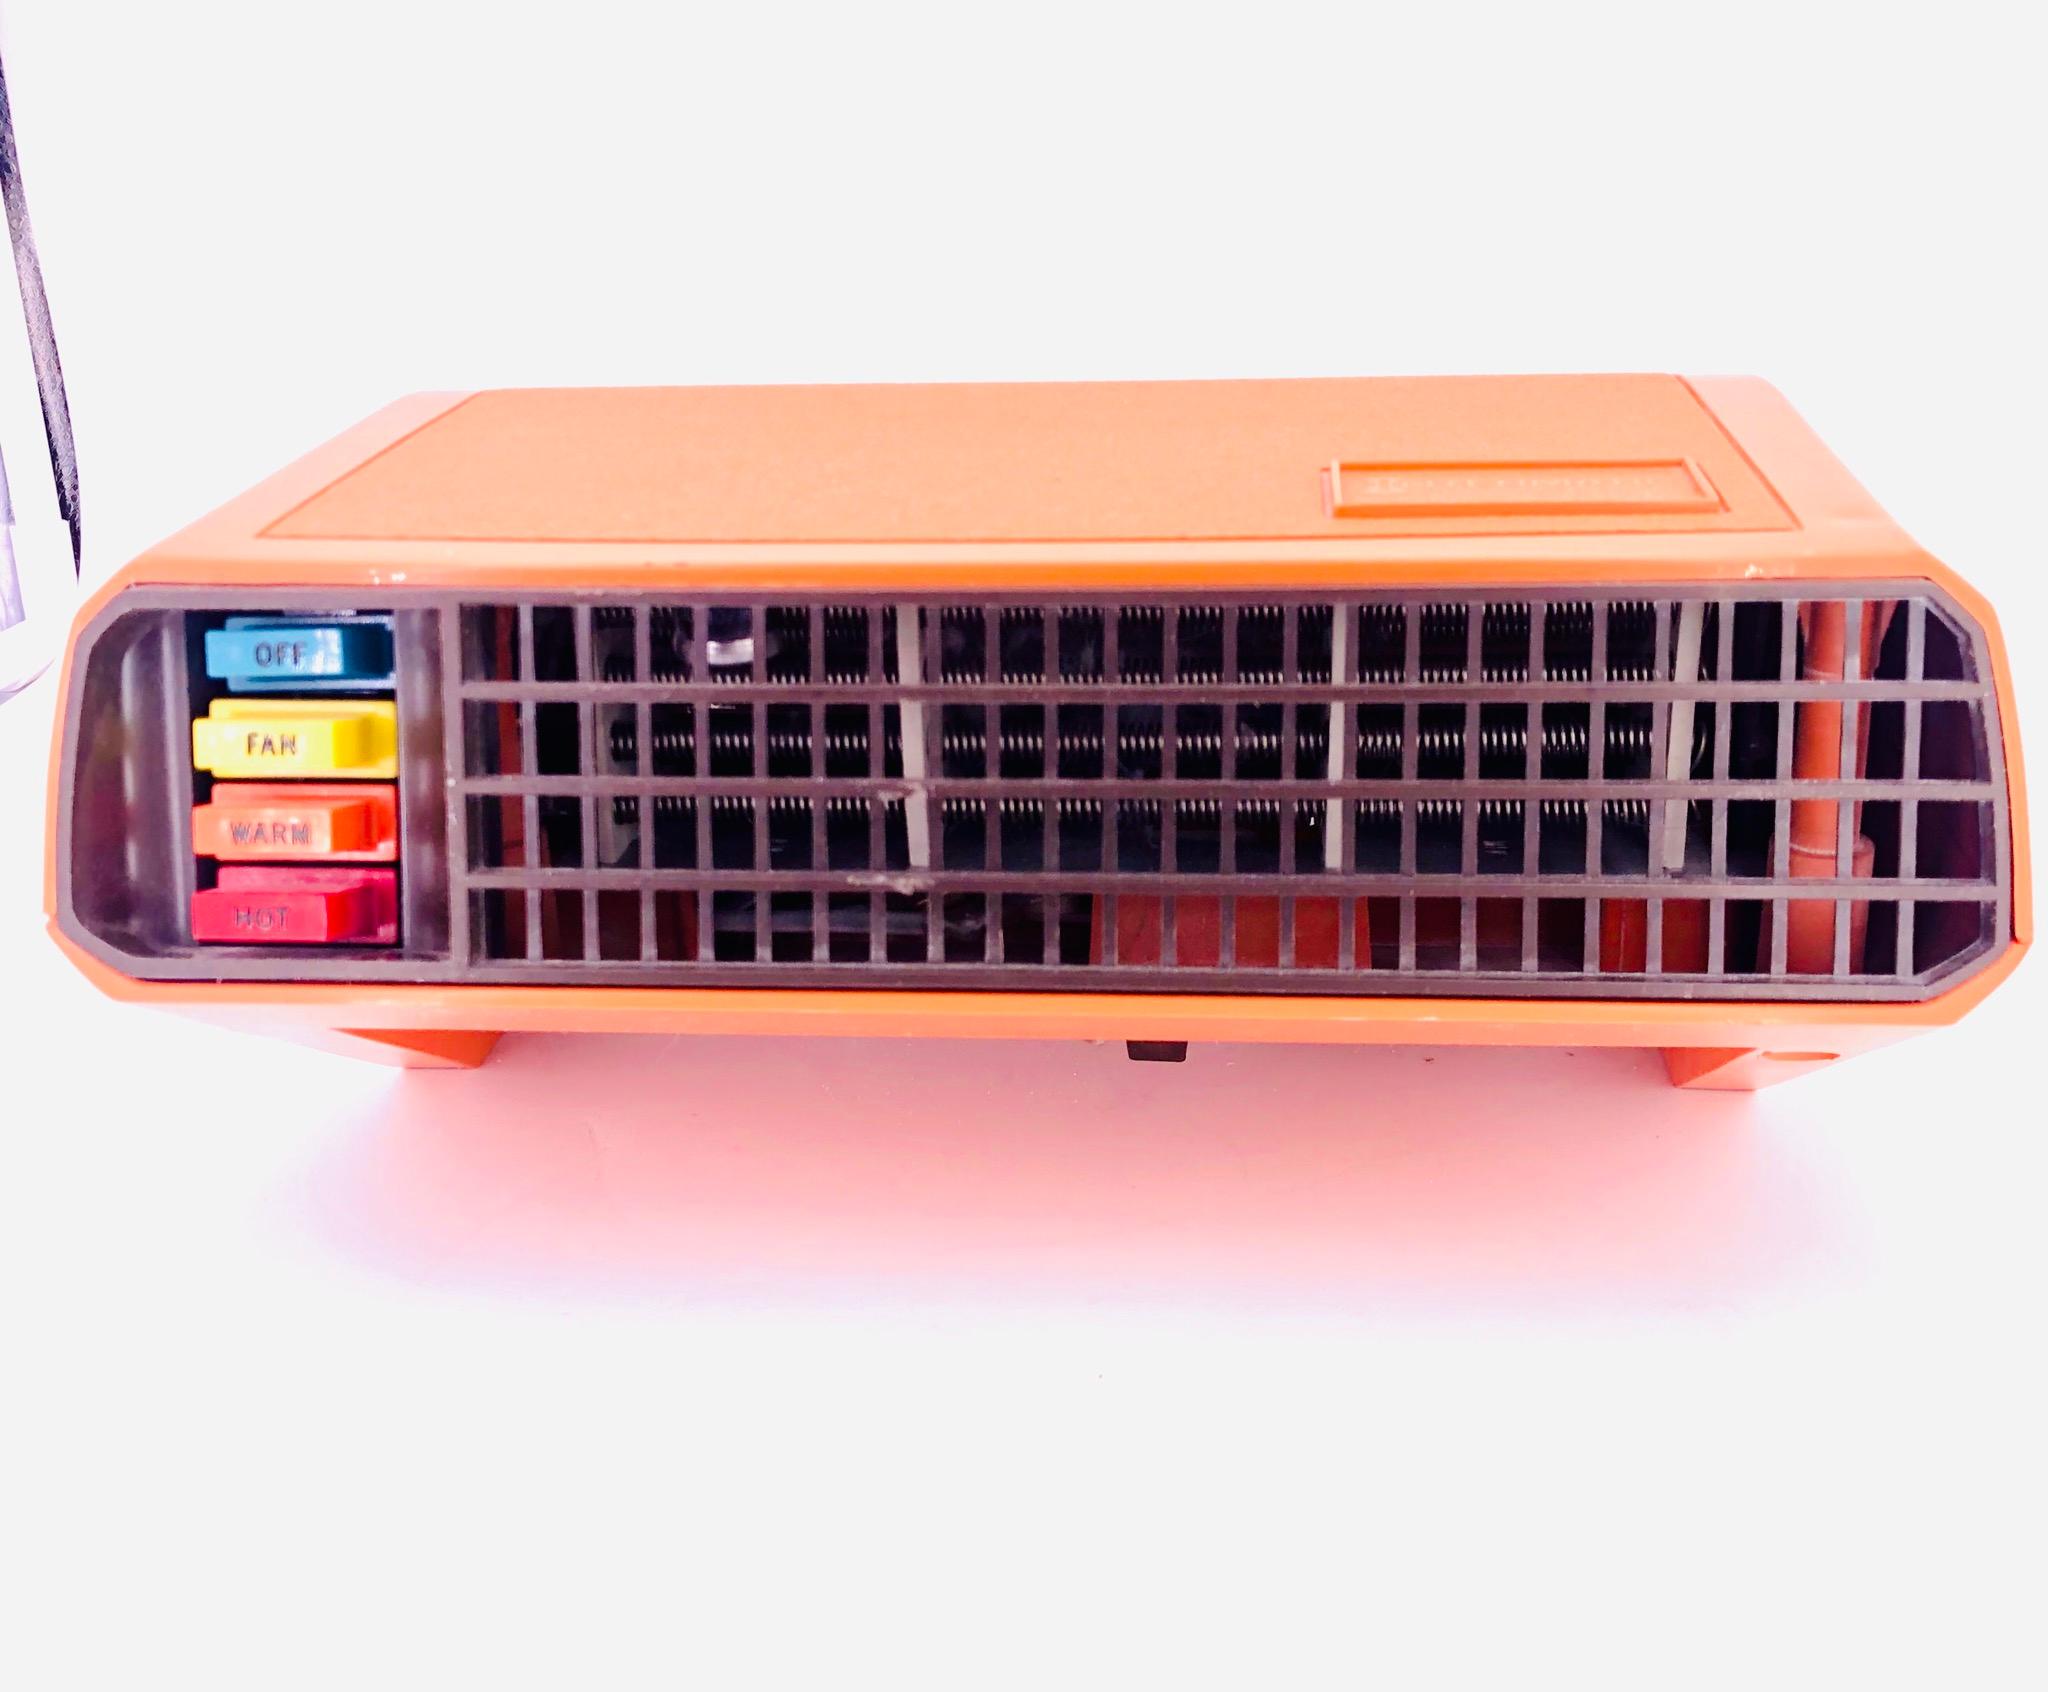 American Space Age design, on this cool portable heather by Intermatic heatwave in perfect condition very light use, with thermostat. Great orange color.